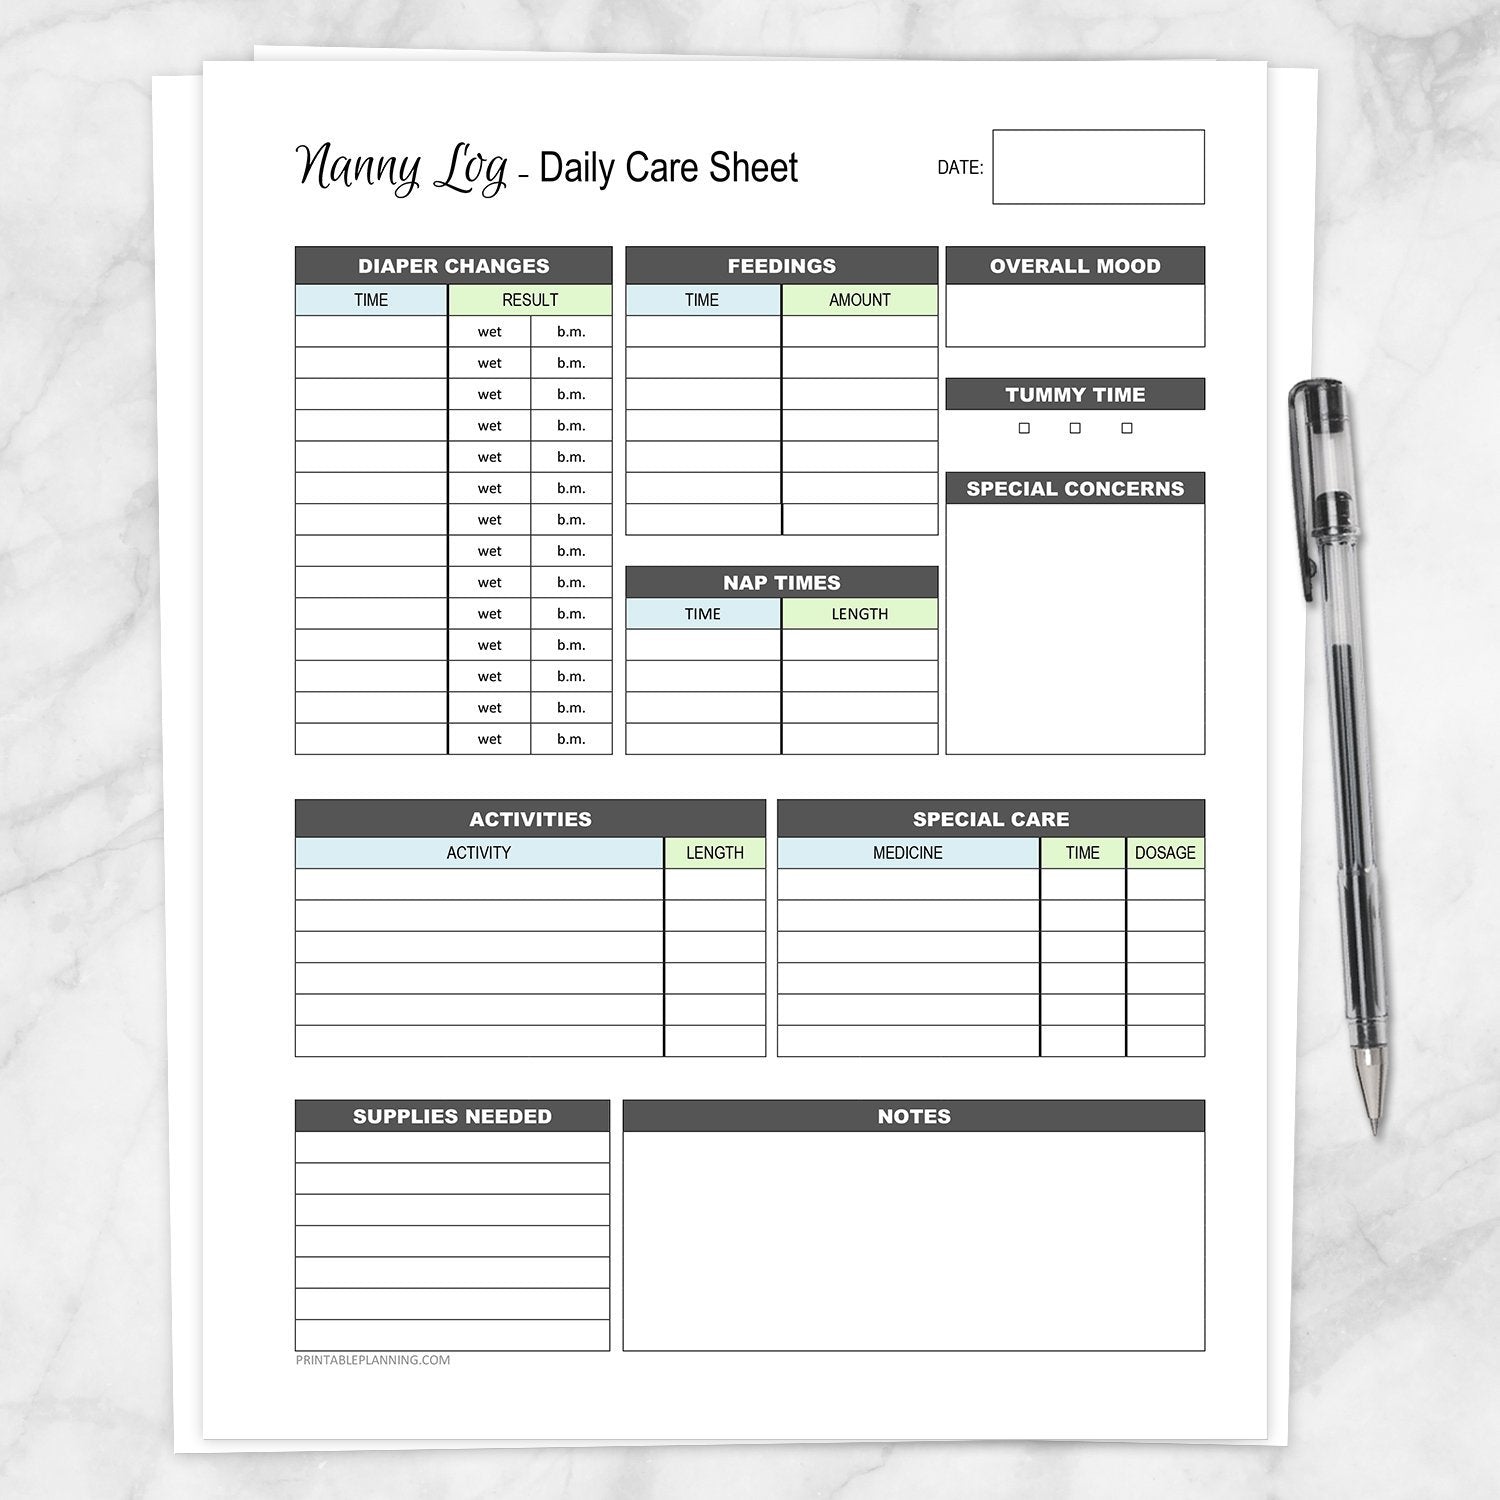 Printable Nanny Log - Daily Infant Care Sheet - Blue and Green, at Printable Planning